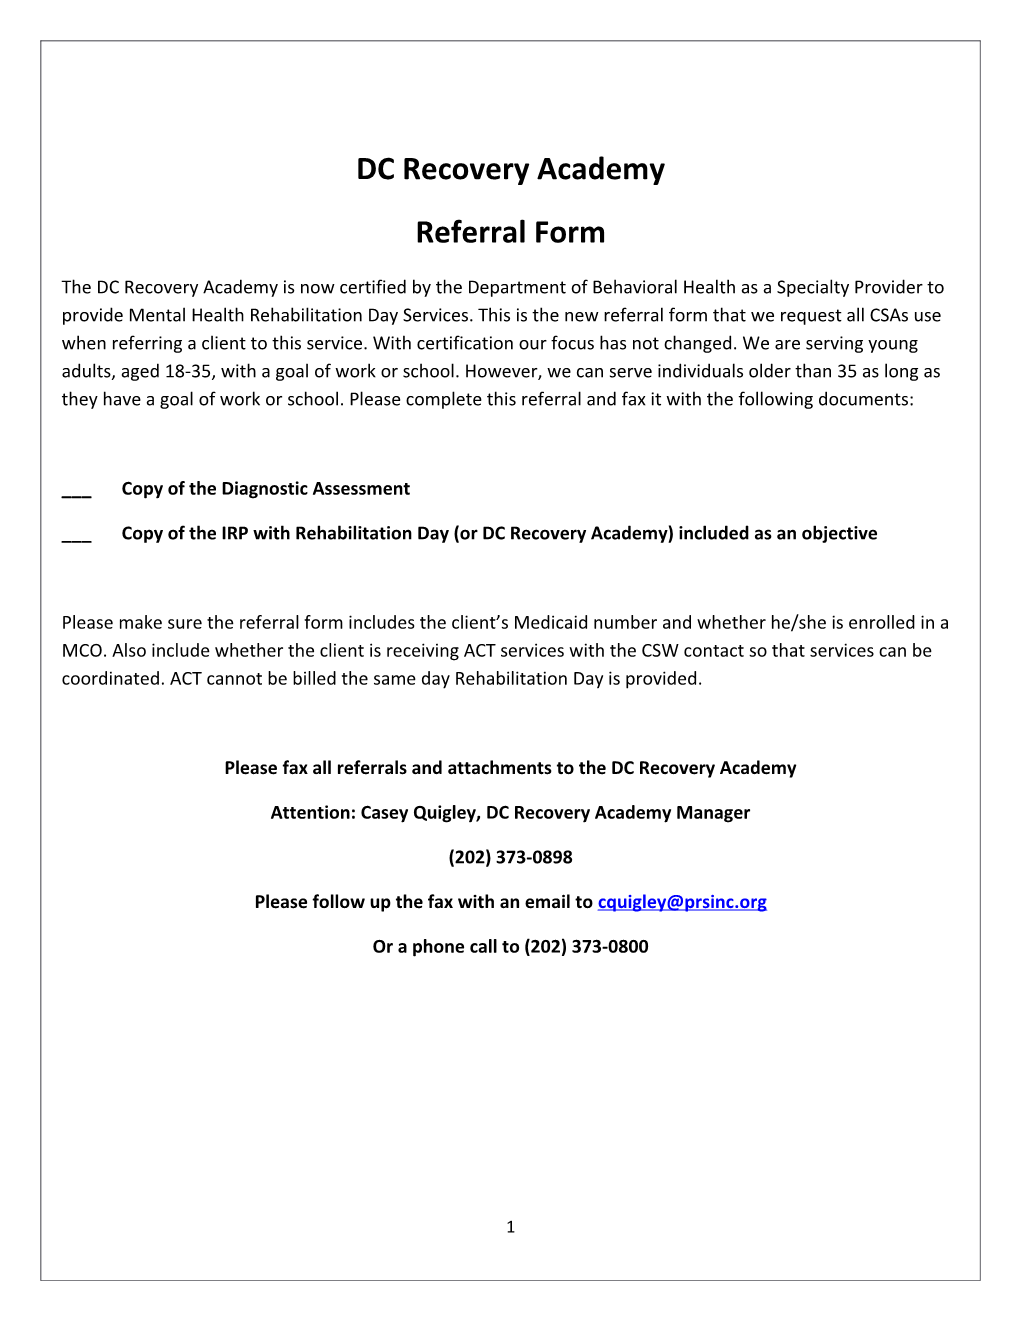 DC Recovery Academy